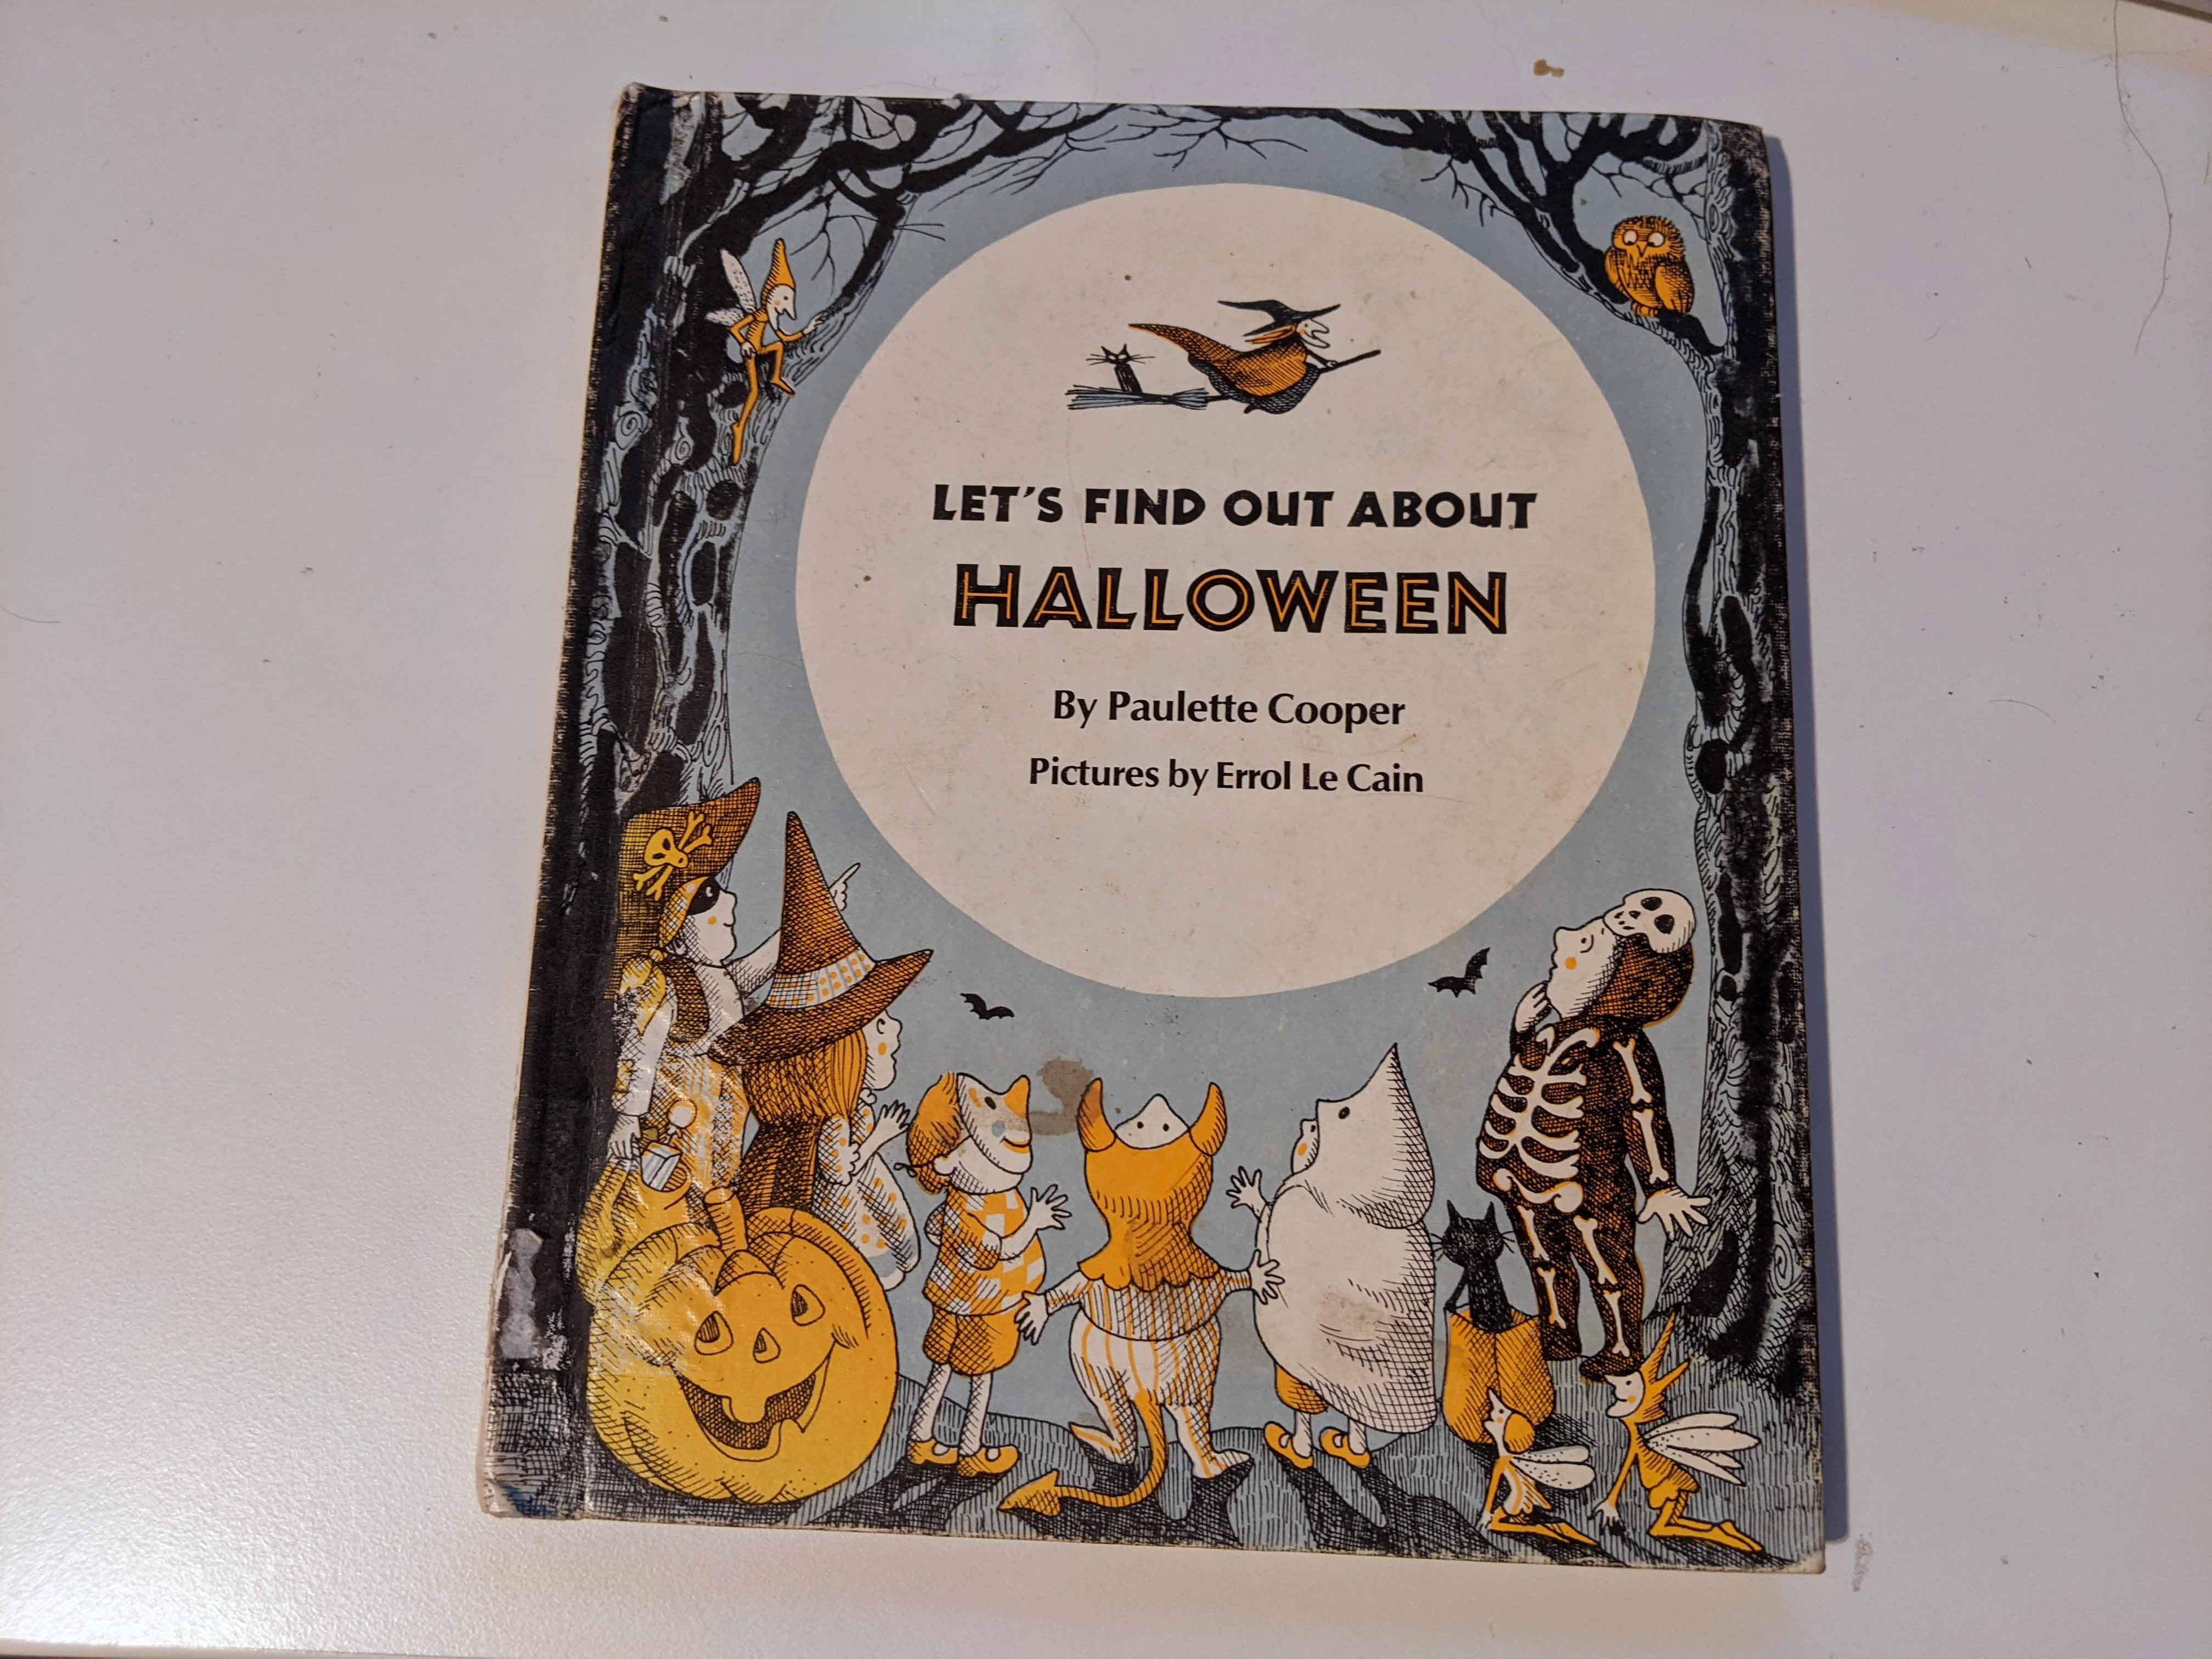 Let’s Find Out About Halloween by Paulette Cooper - Fonts In Use